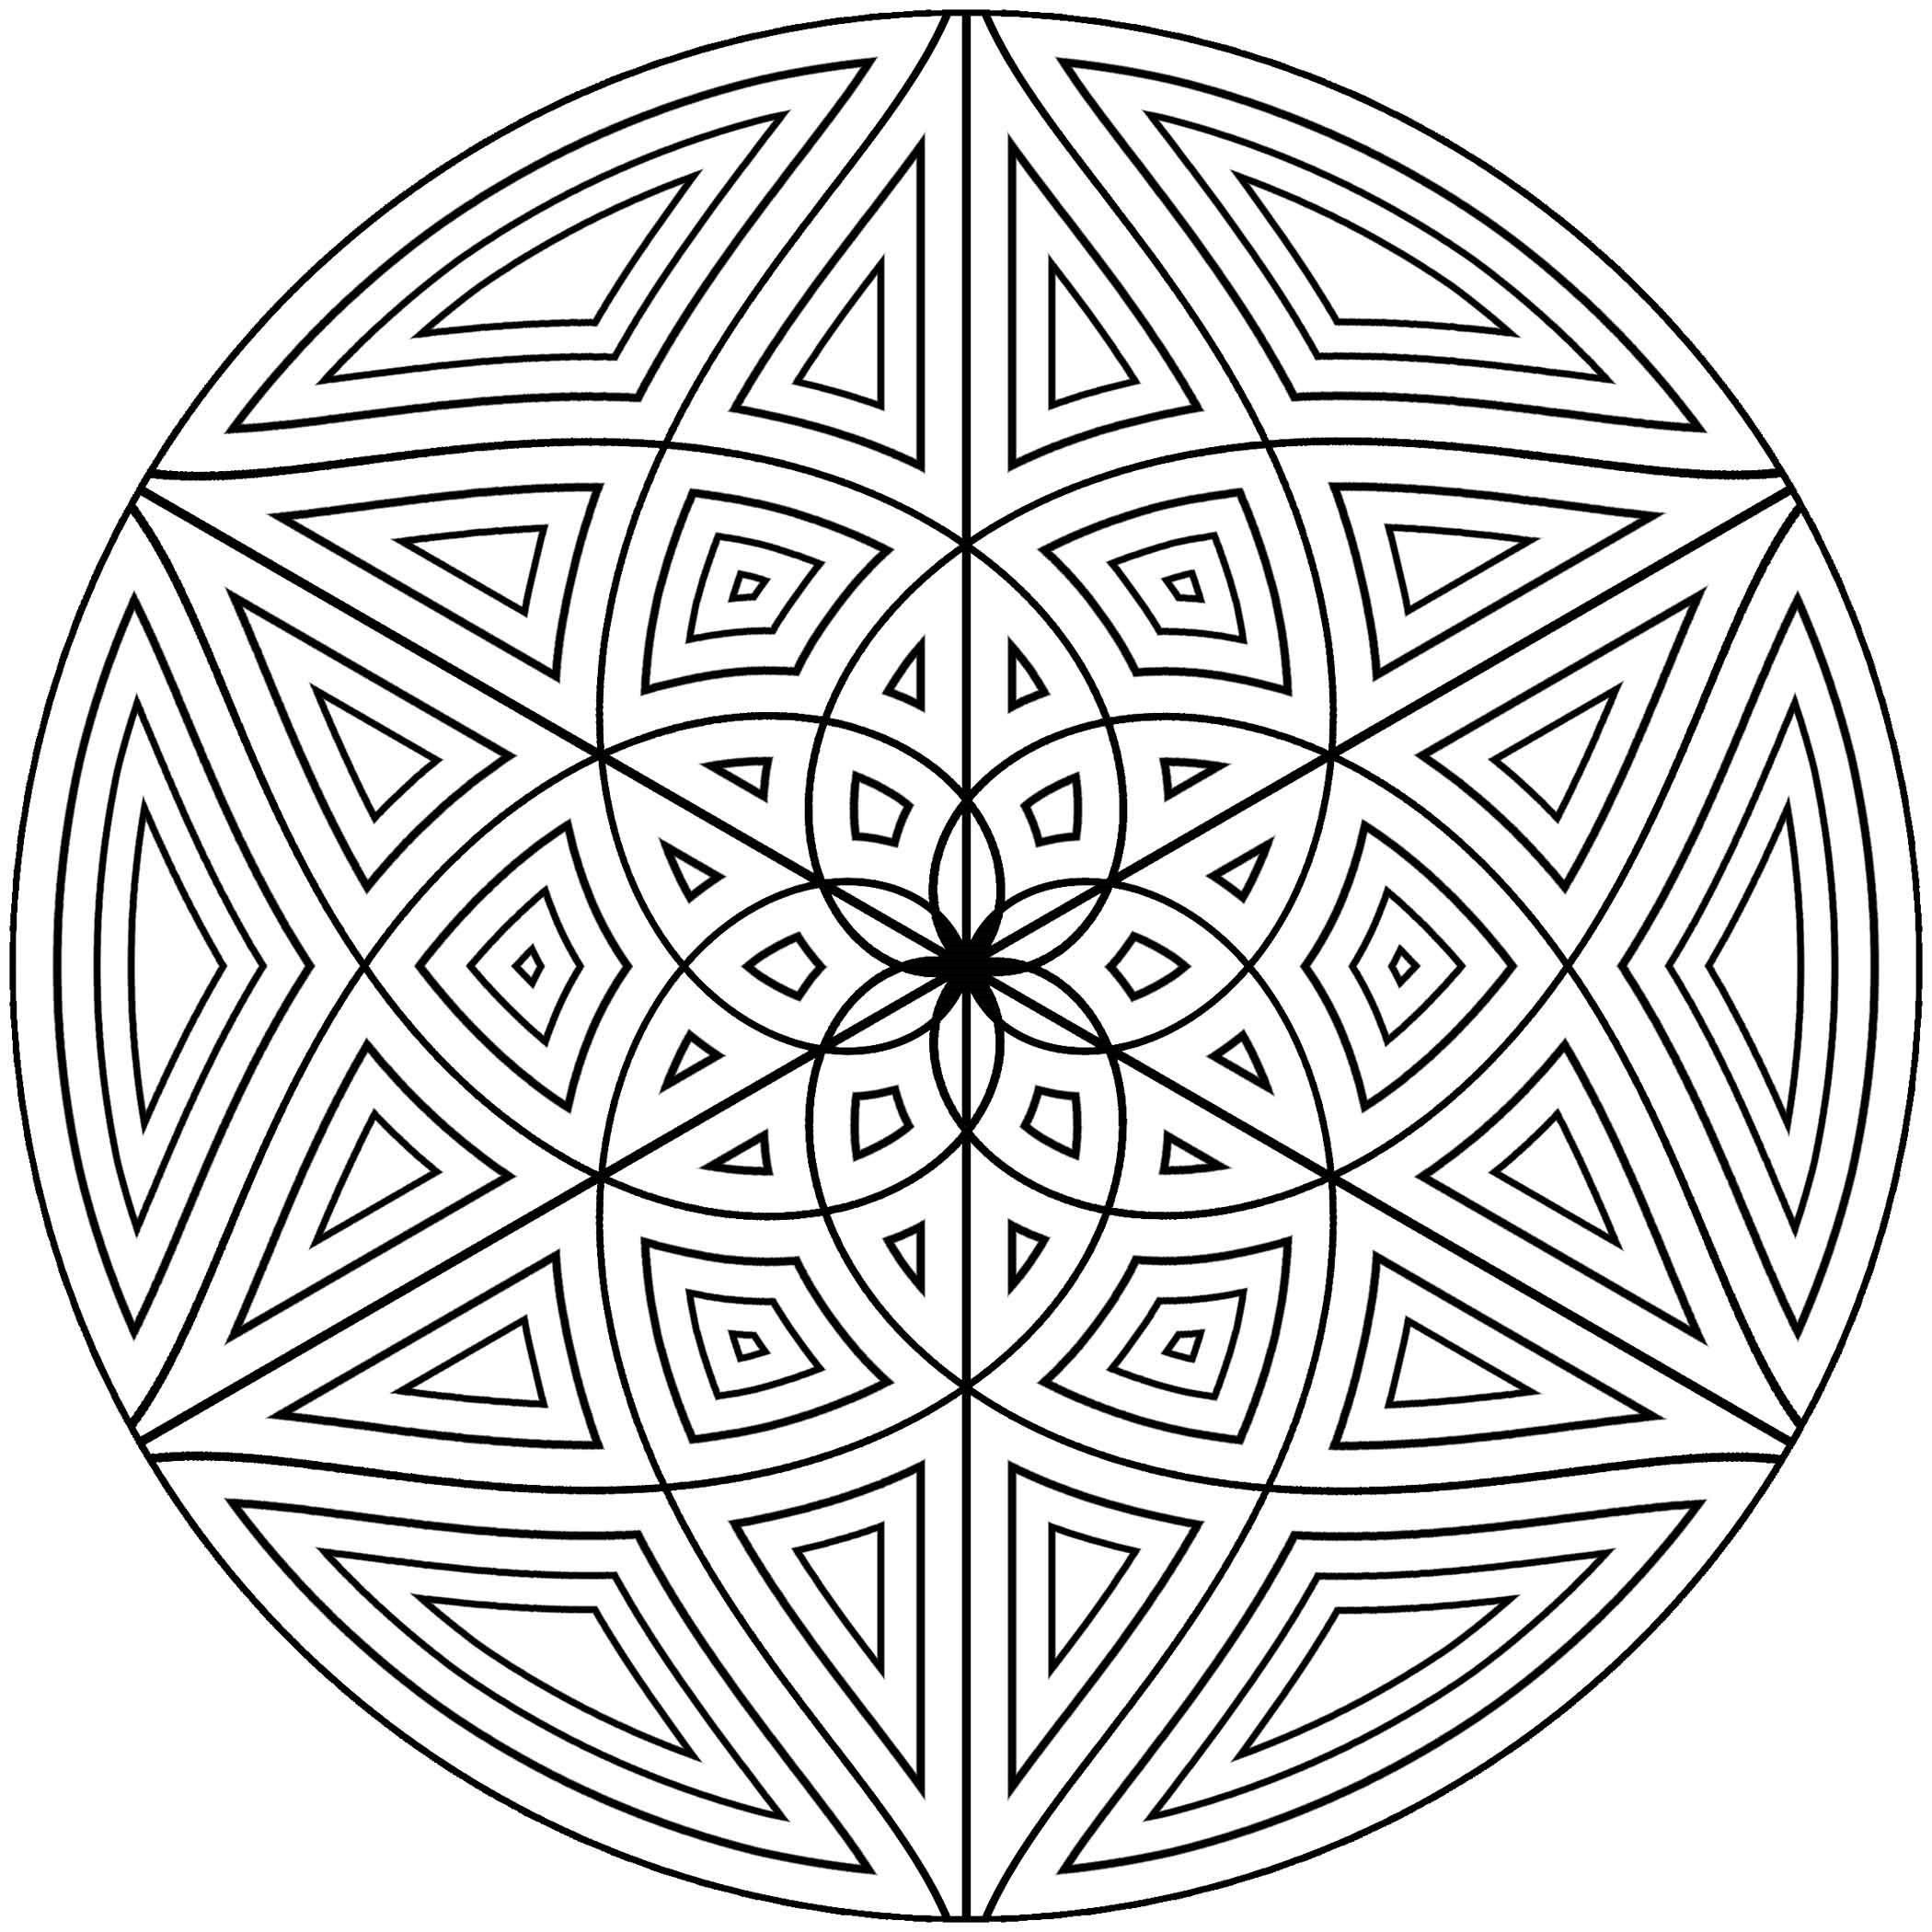 Design Coloring Pages
 Free Printable Geometric Coloring Pages for Adults